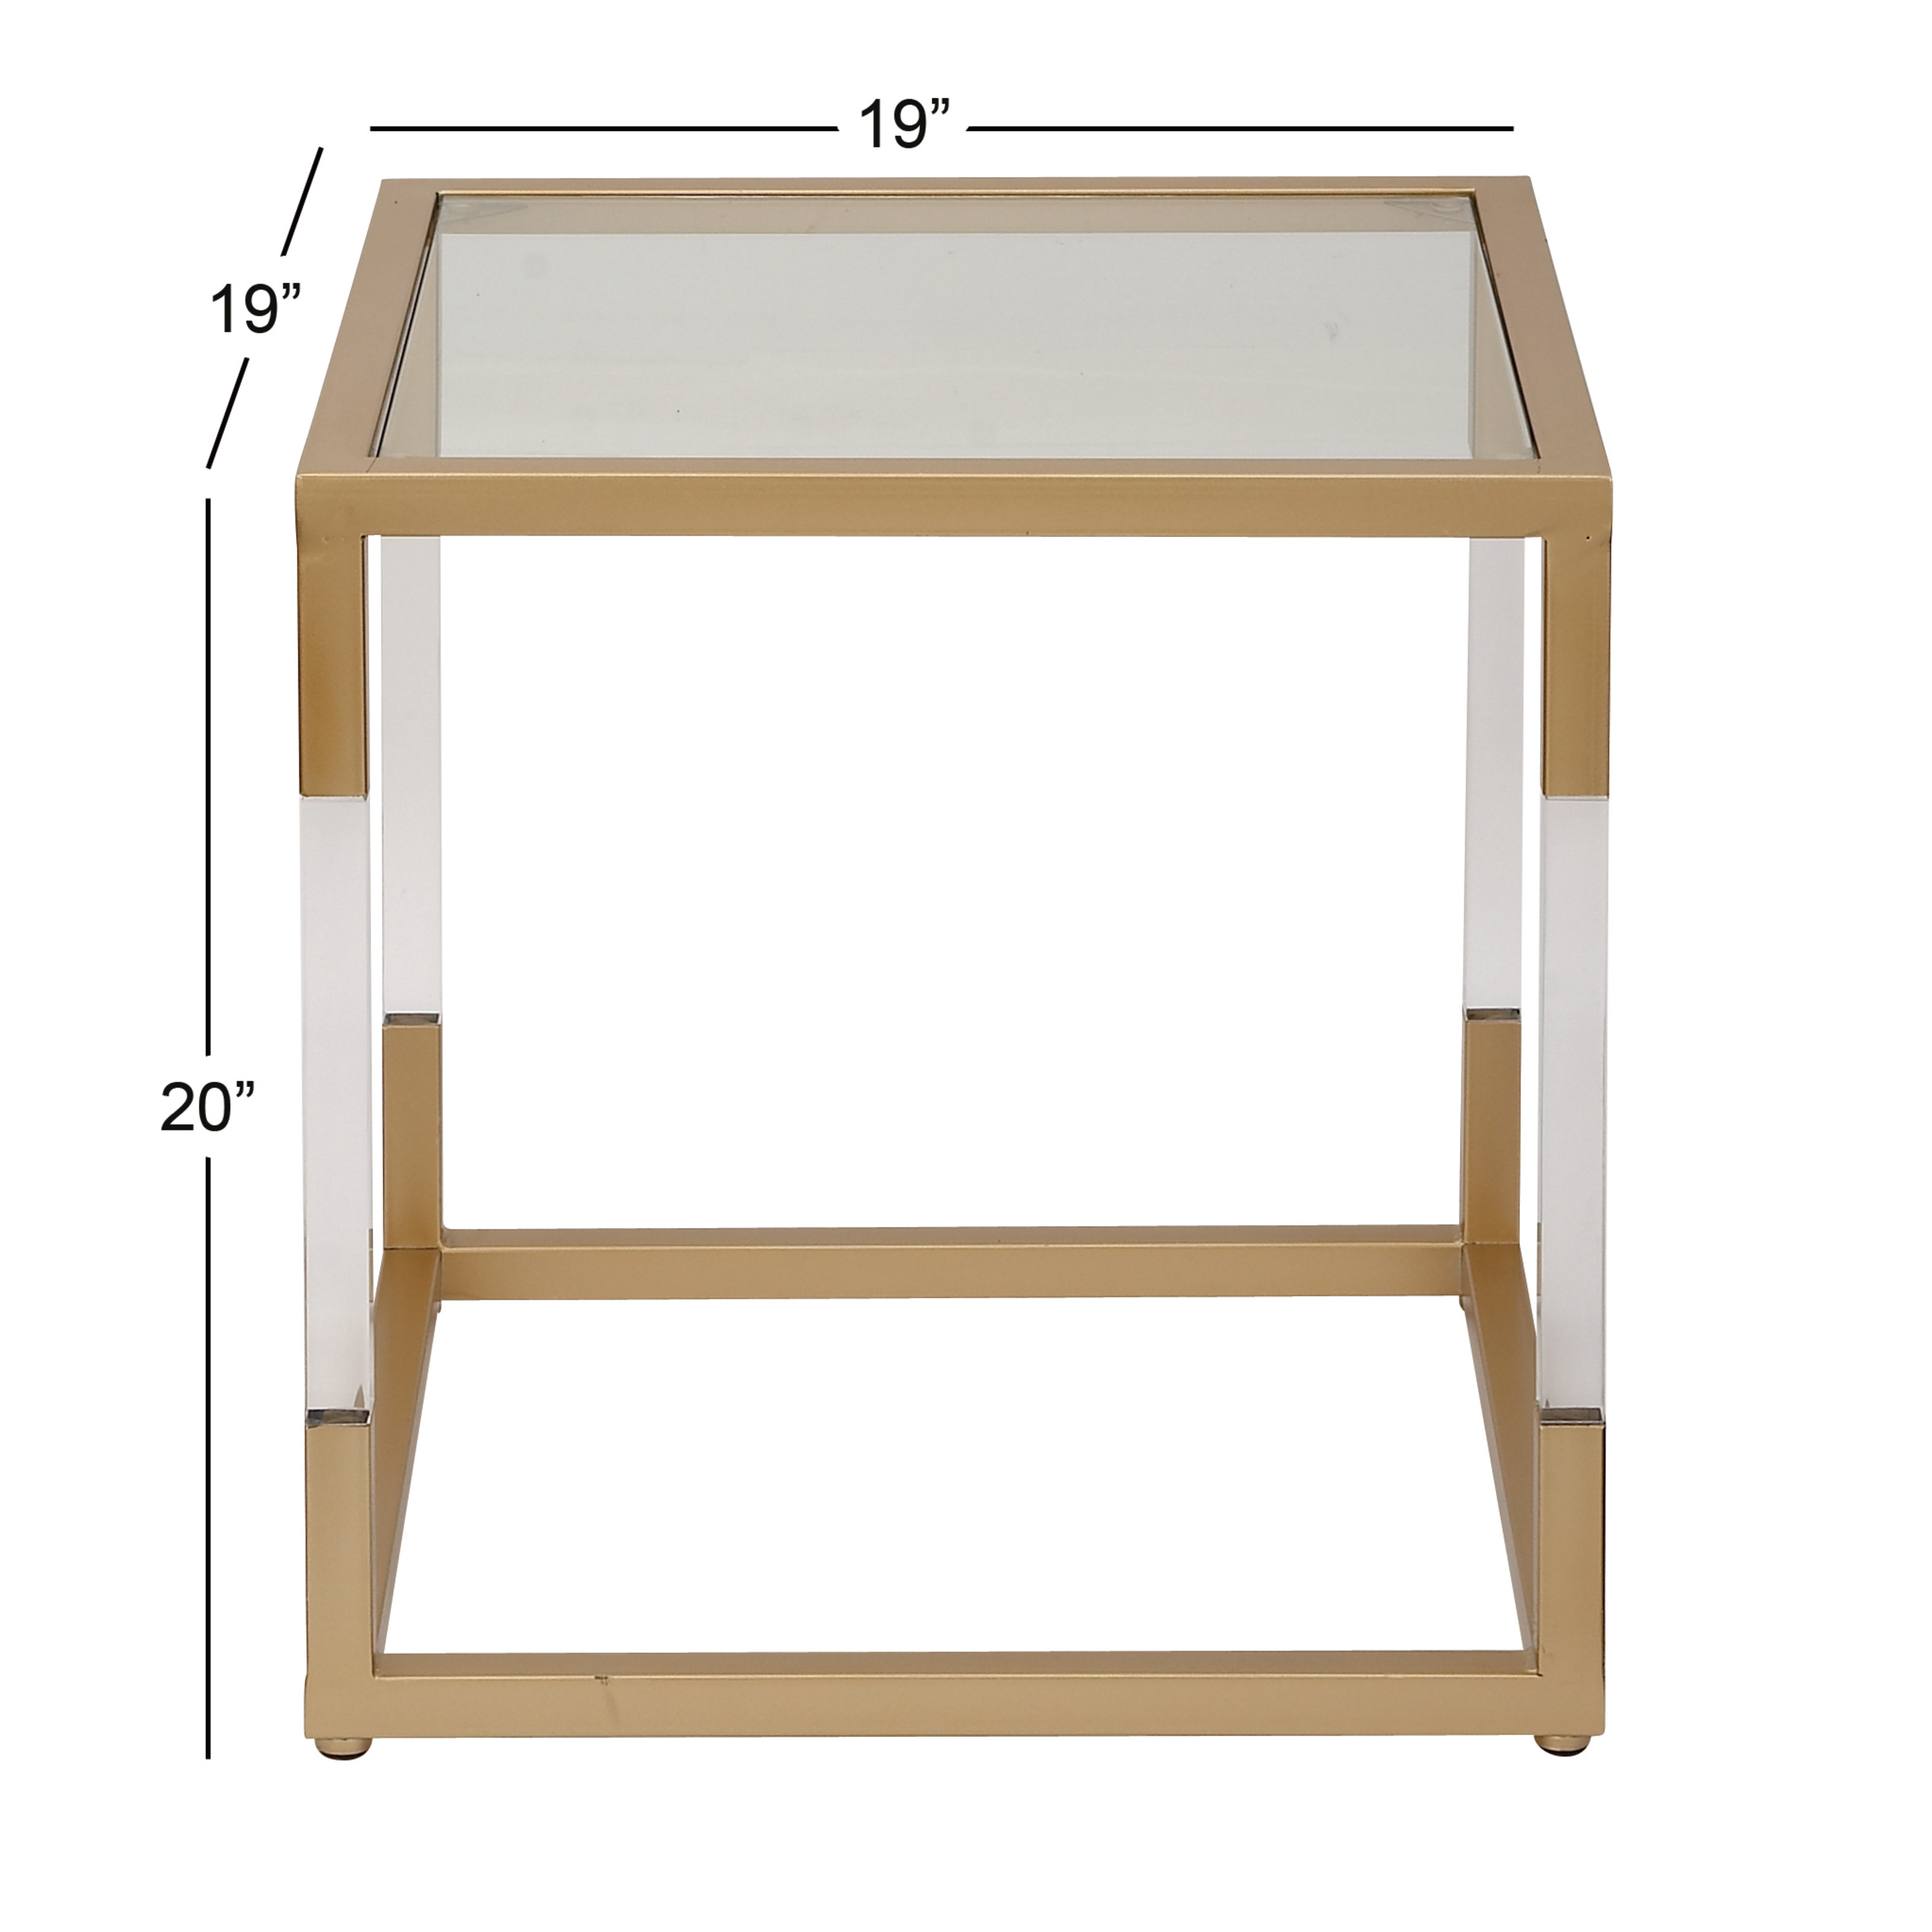 DecMode 19" x 20" Gold Metal Accent Table with Clear Glass Top and Acrylic Legs, 1-Piece - image 4 of 7